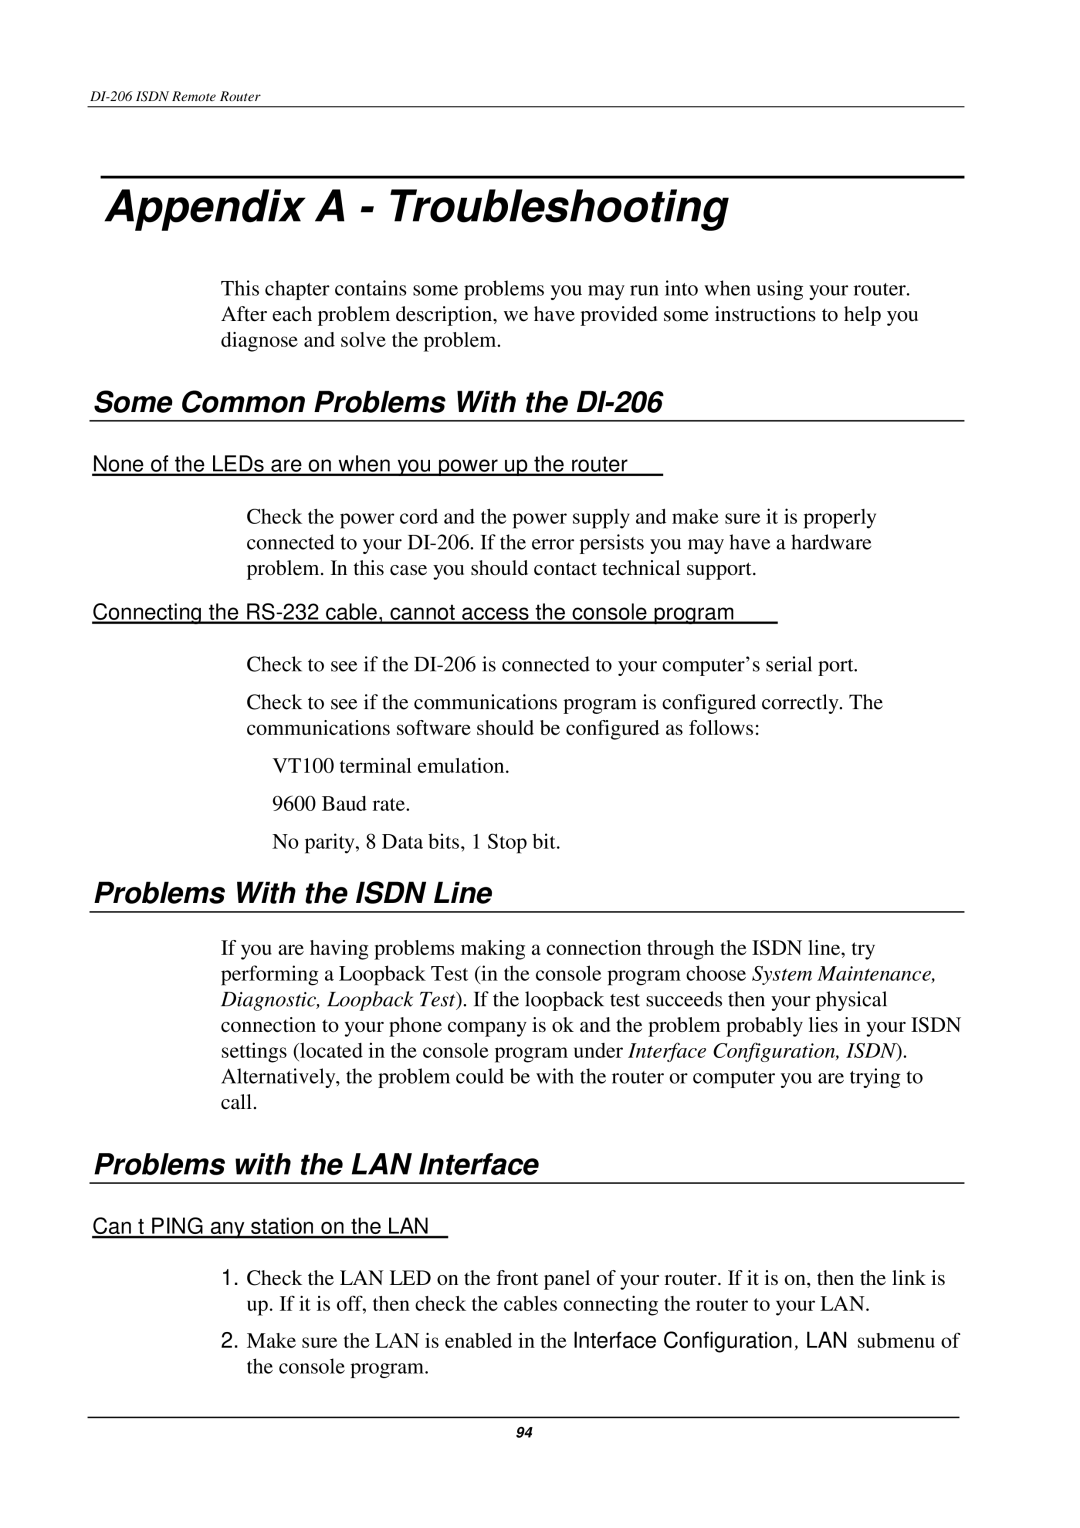 D-Link manual Appendix a Troubleshooting, Some Common Problems With the DI-206, Problems With the Isdn Line 